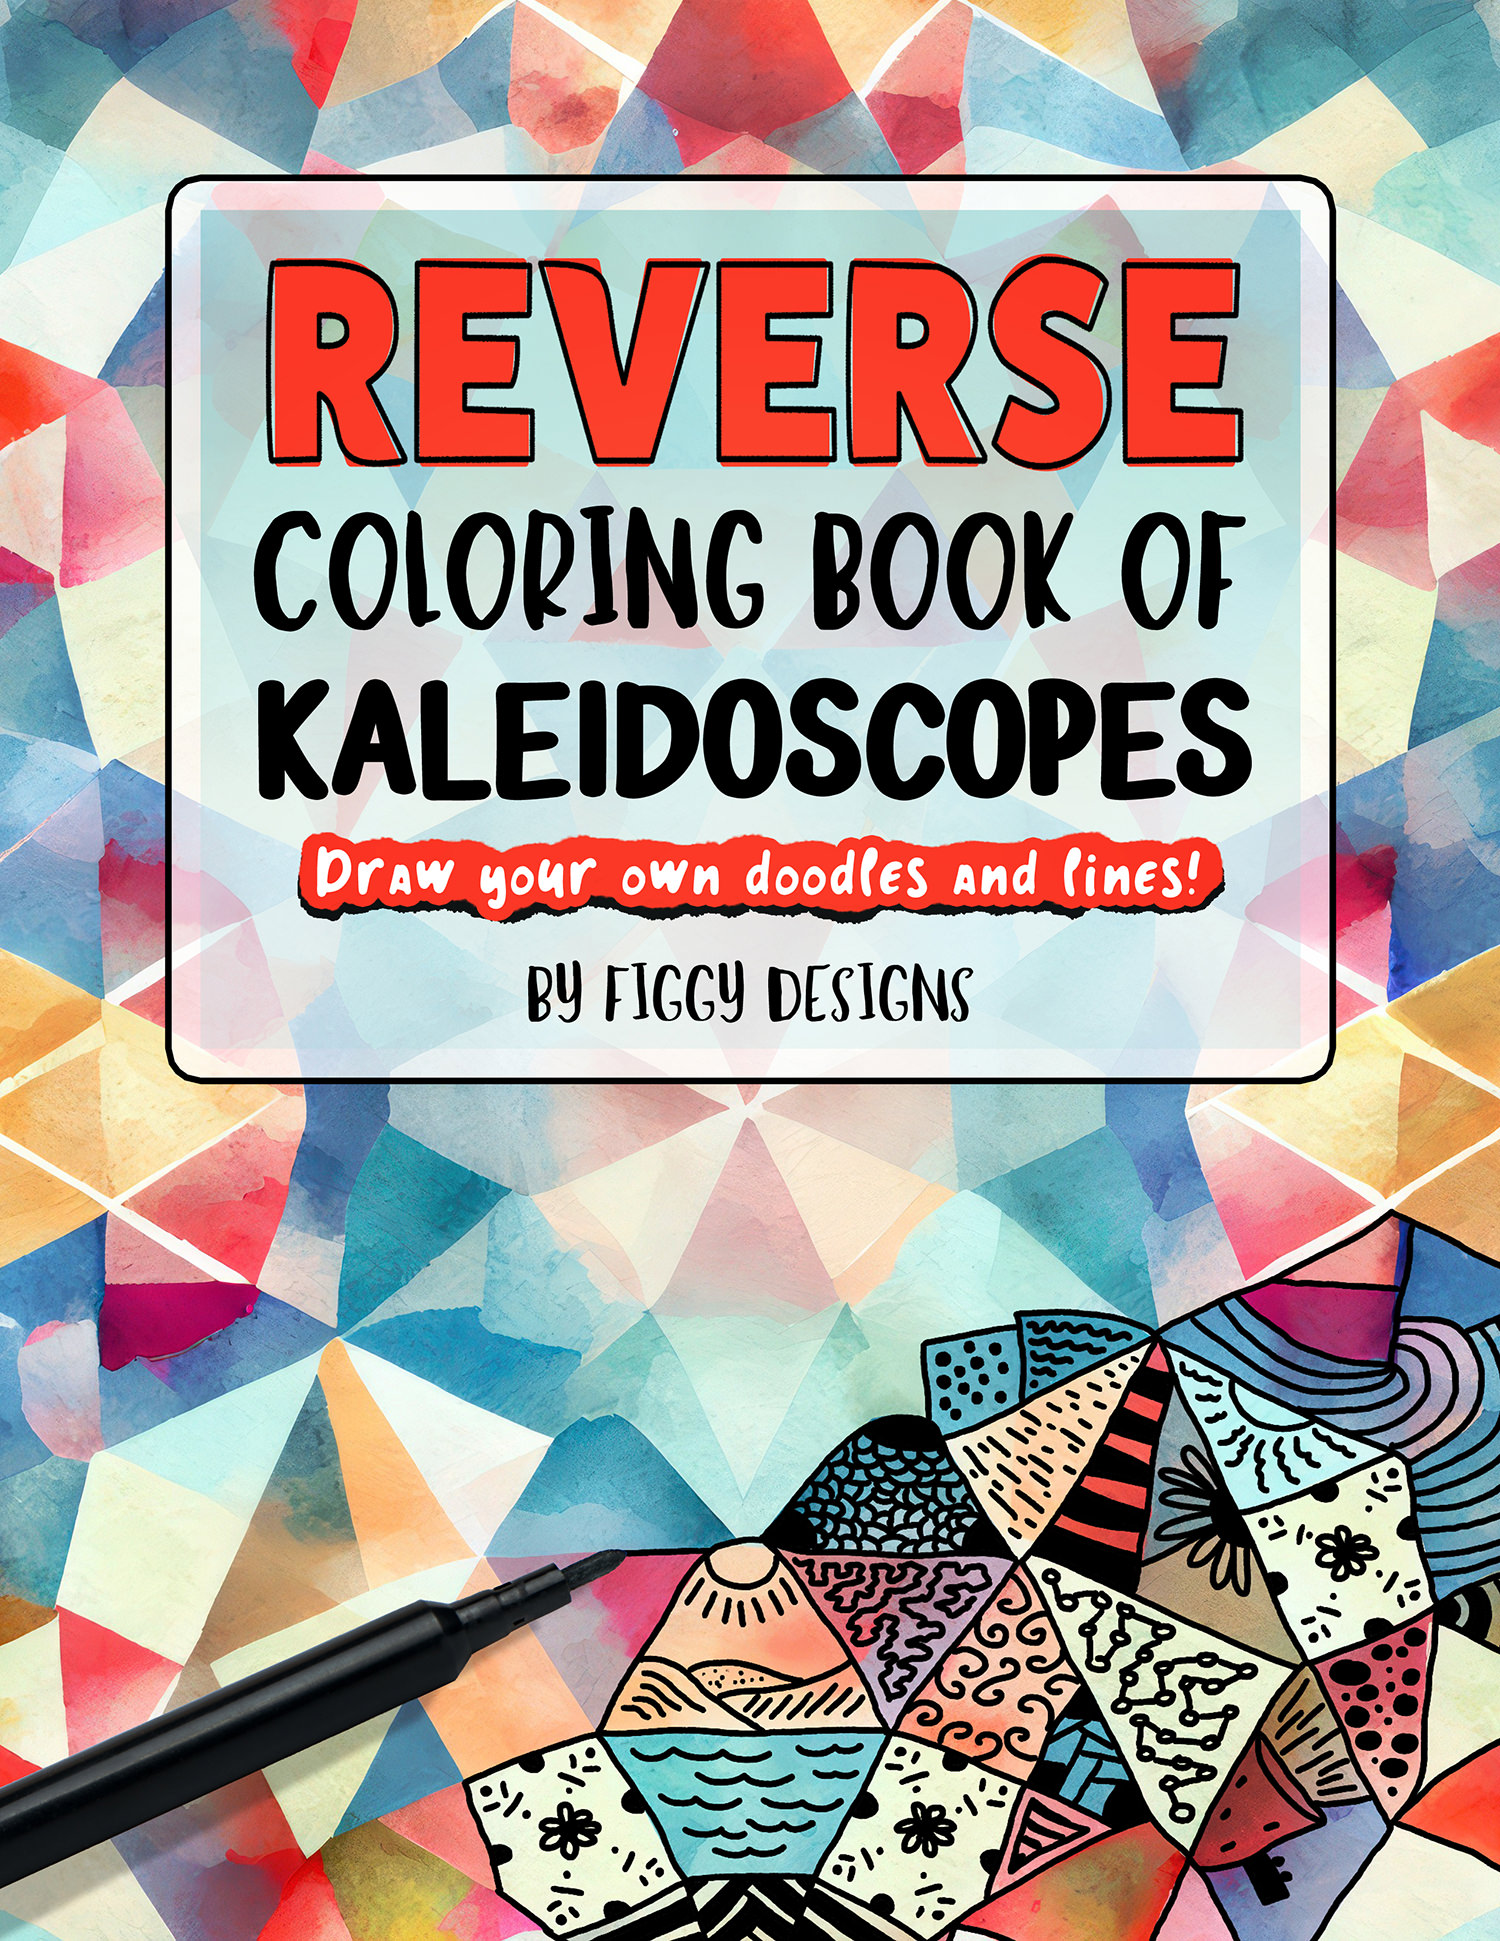 Reverse Coloring Book of Kaleidoscopes